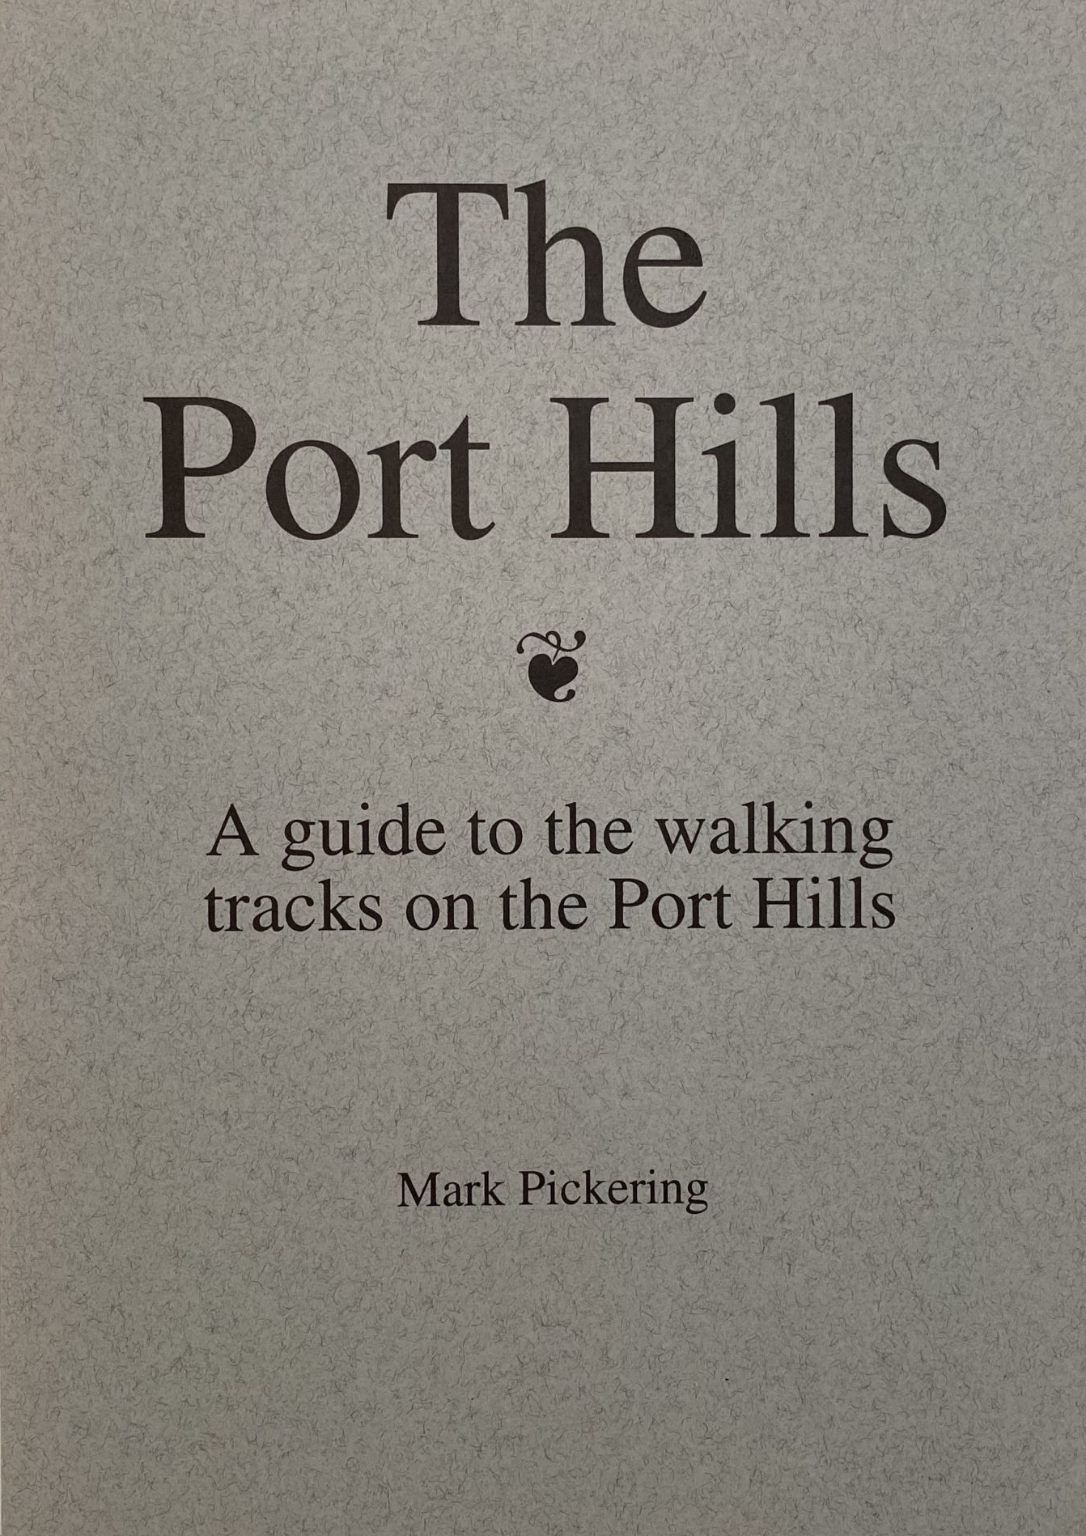 THE PORT HILLS: A Guide to Walking Tracks on the Port Hills